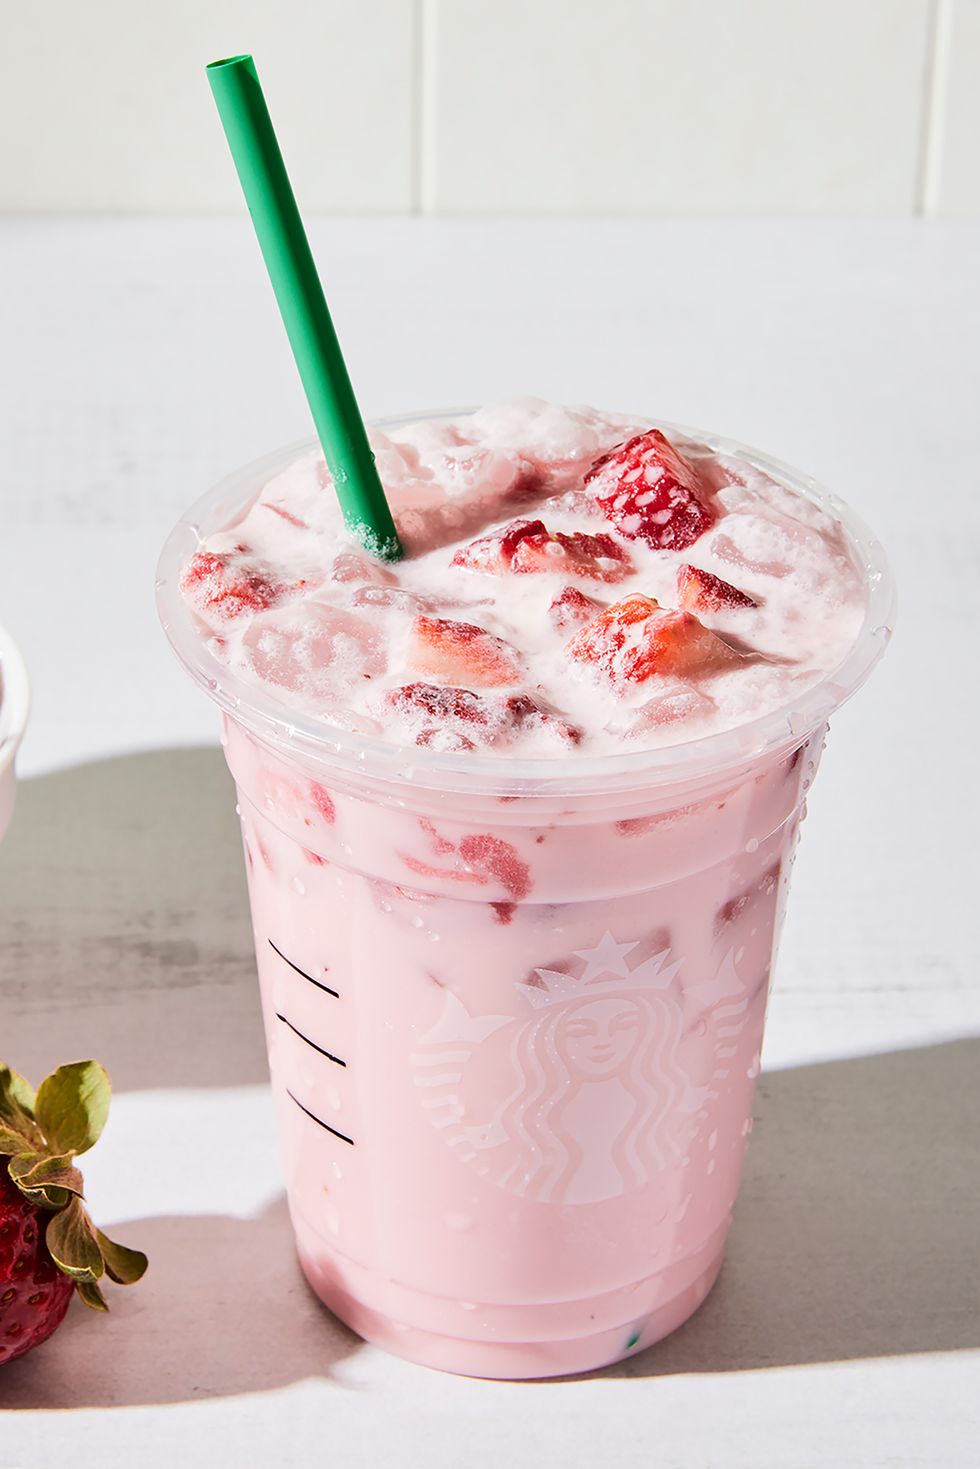 a tall glass with creamy light pink beverage on ice with sliced fresh strawberries and a glass straw